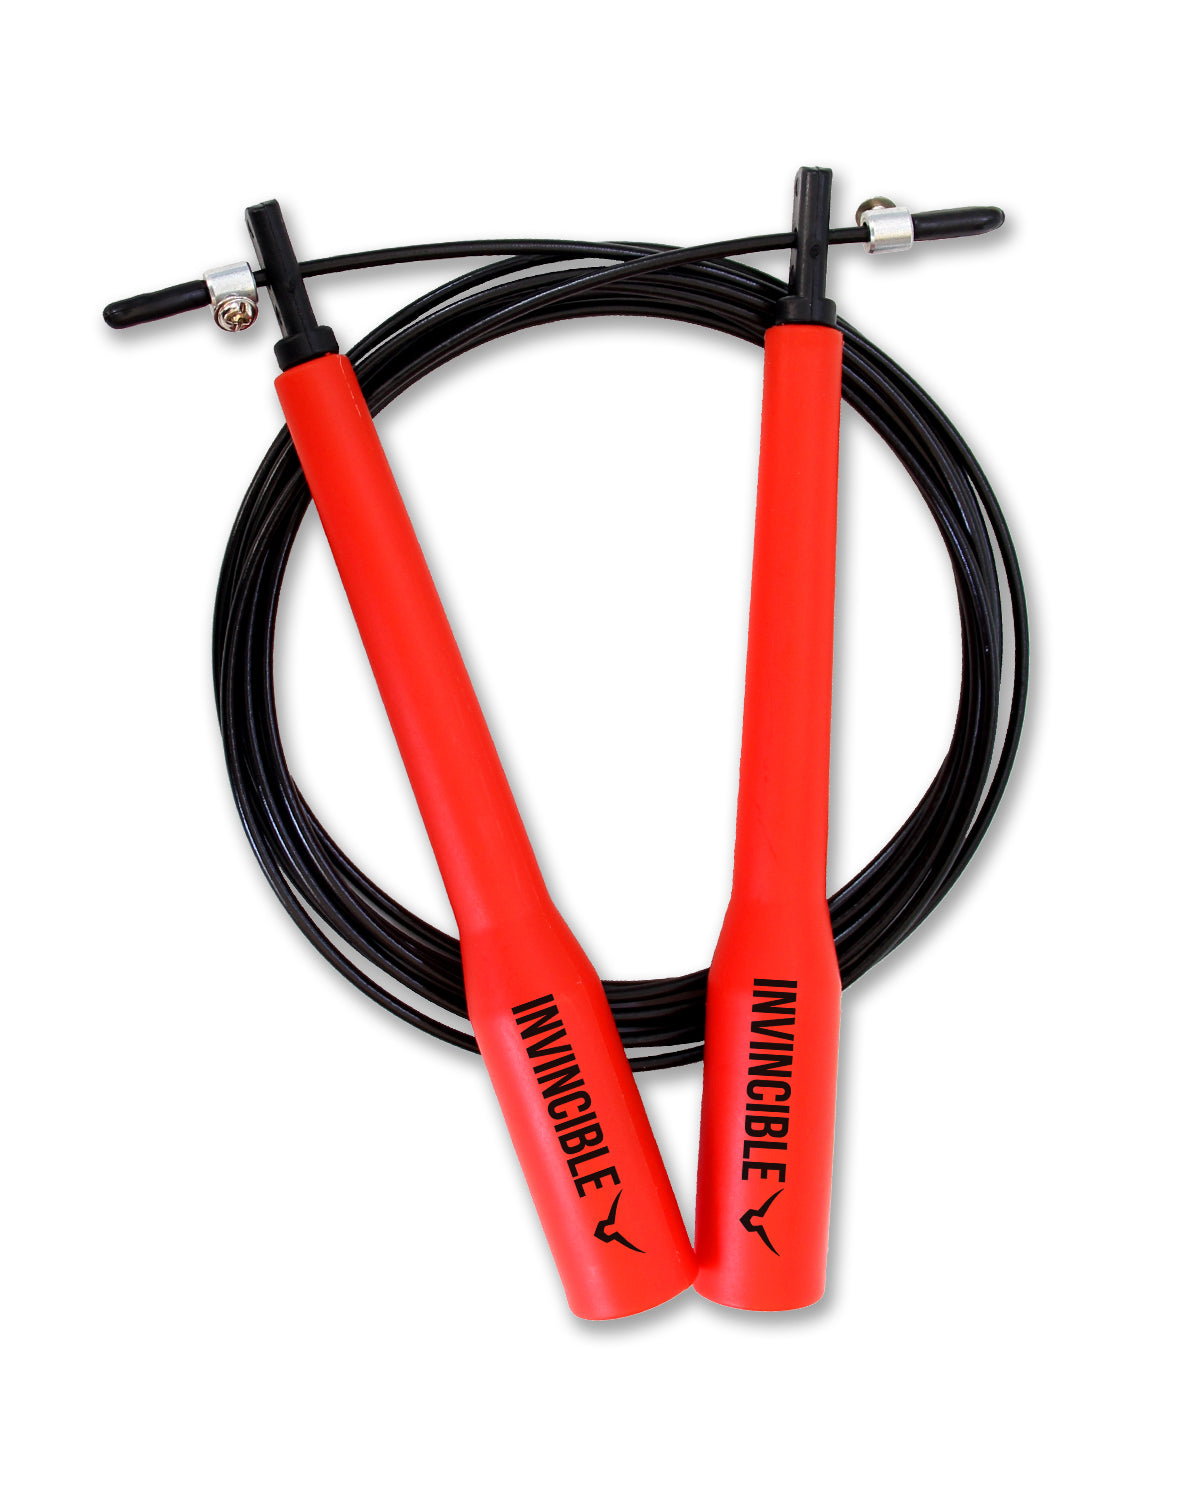 Invincible Jump Rope for Women and Men, Adjustable Steel Skipping Rope for Fitness Workout and Home Exercise